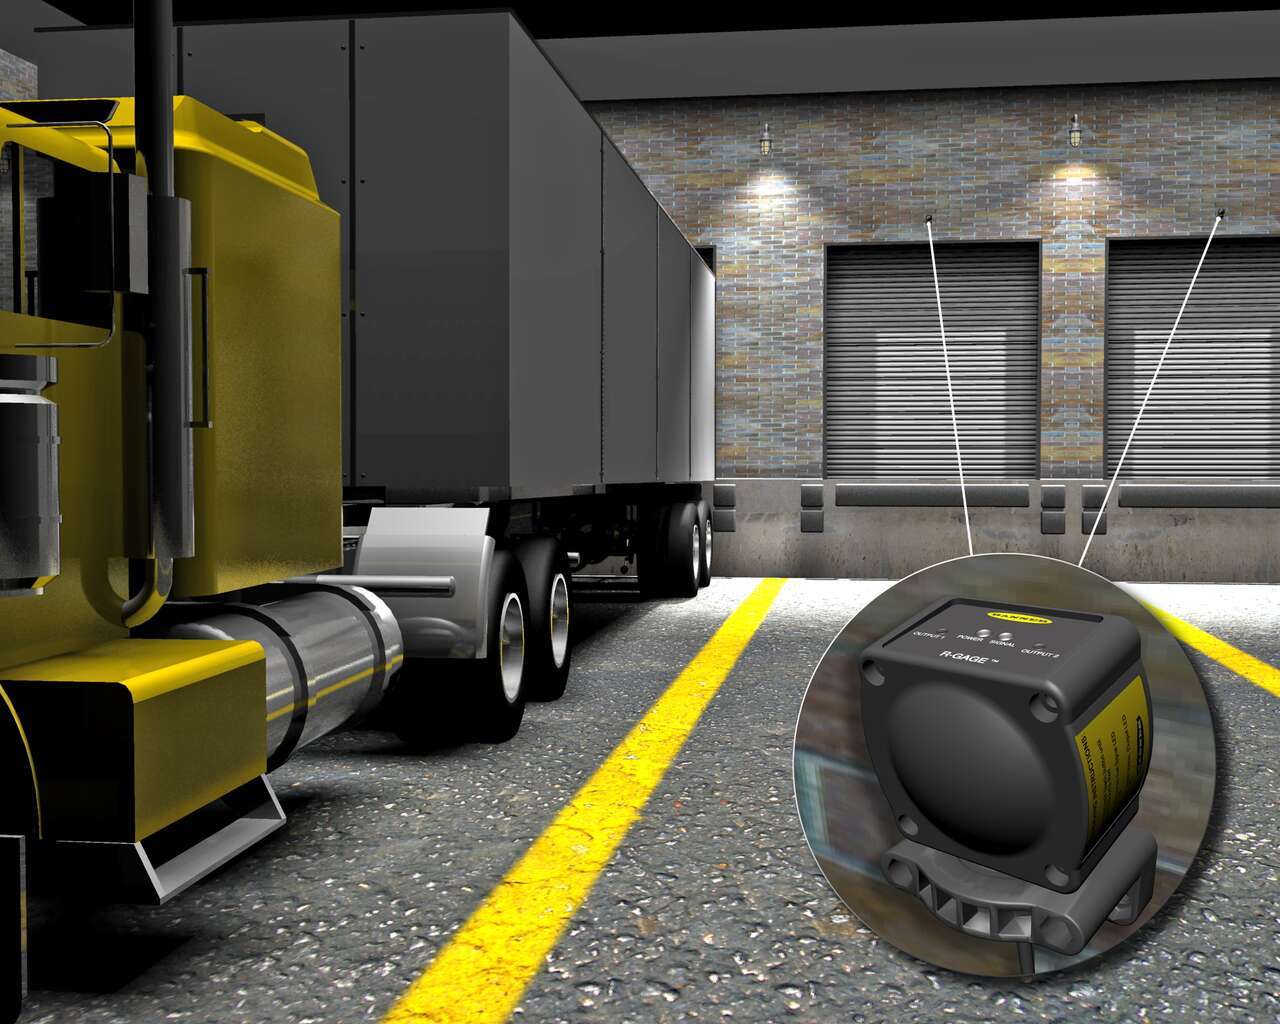 Large Vehicle Detection at an Outdoor Loading Dock